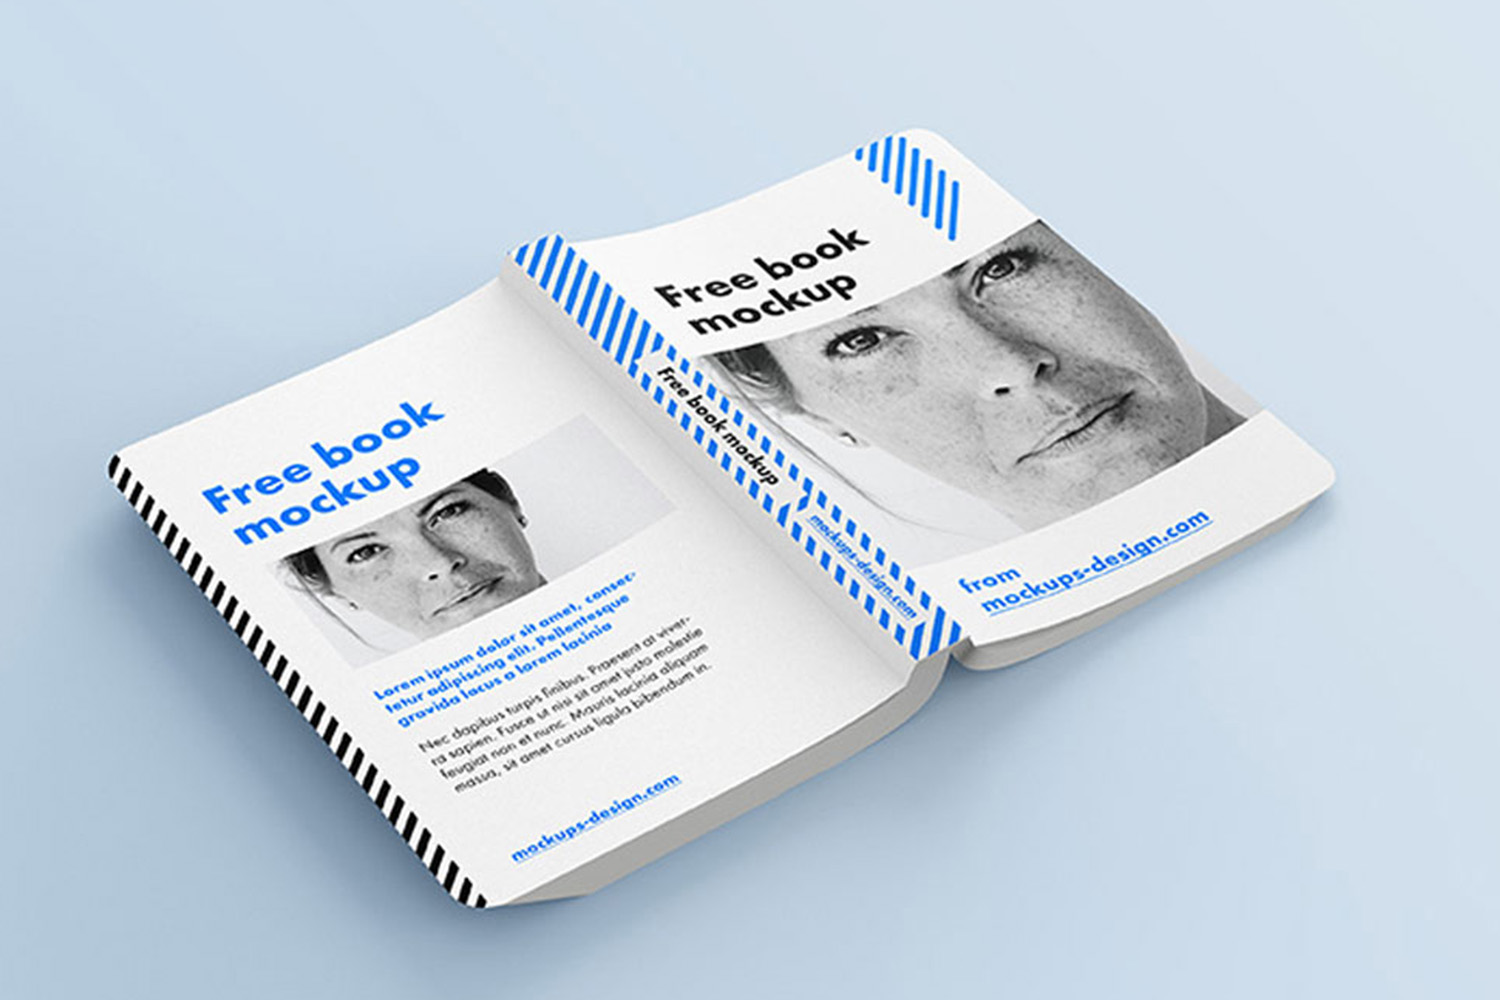 Rounded Book Mockup Free Download